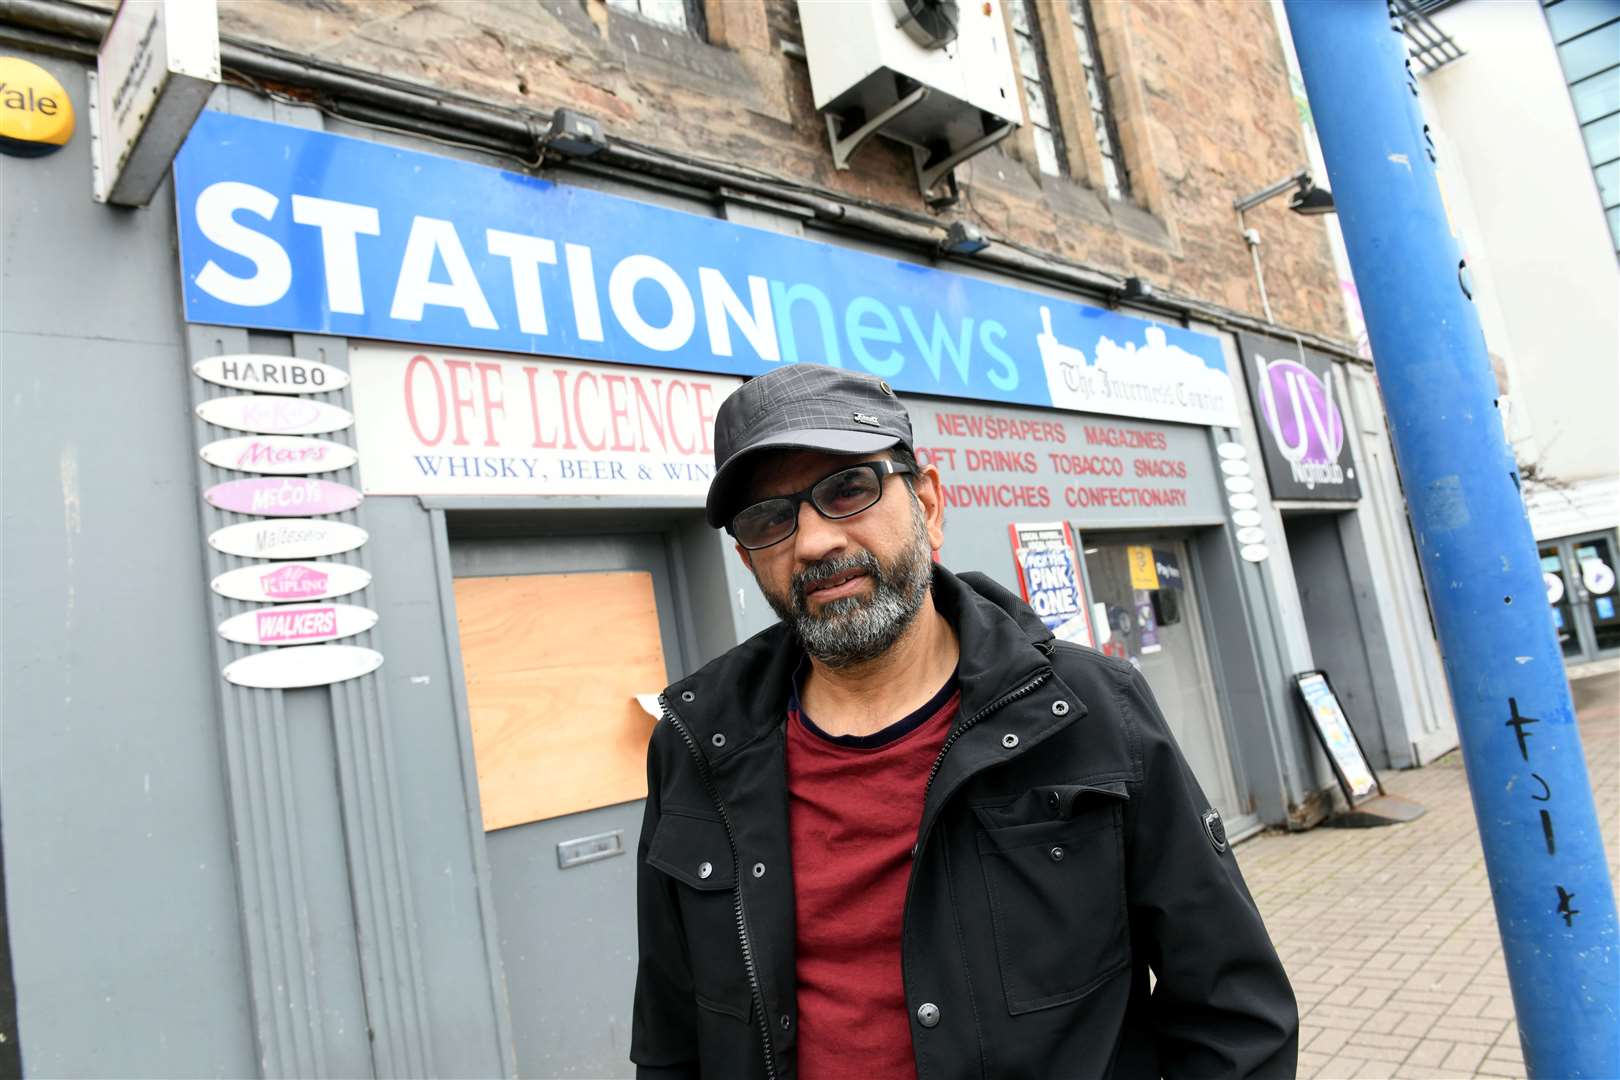 Munawar Ahmad (55), who owns the Station News at Inverness Bus Station, said he is concerned by the increase of antisocial behaviour in his shop.